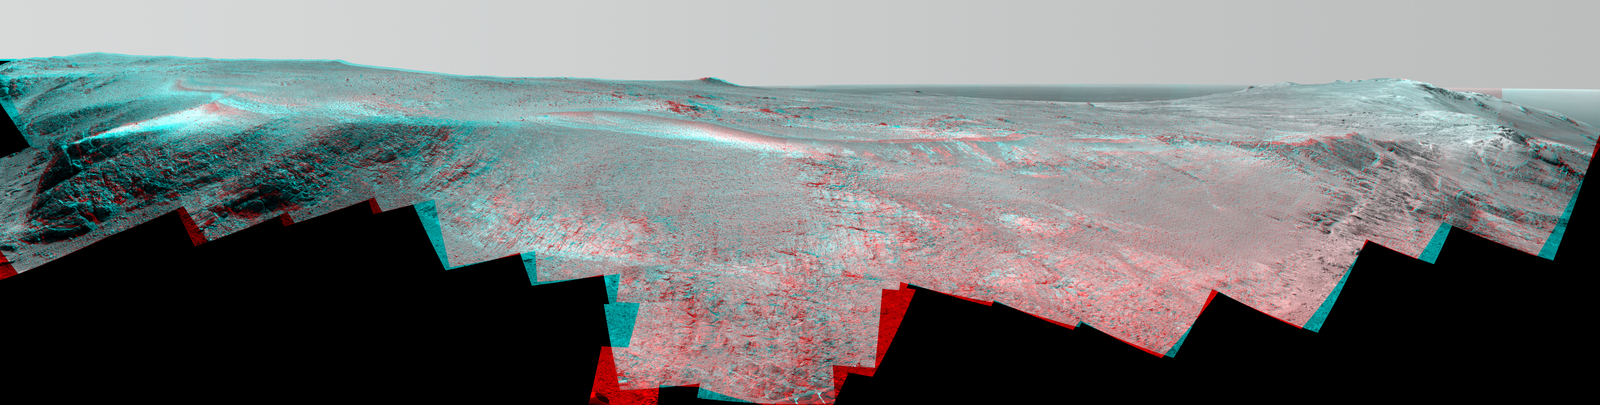 Mars Rover Opportunity's Panorama of 'Rocheport' (Stereo)